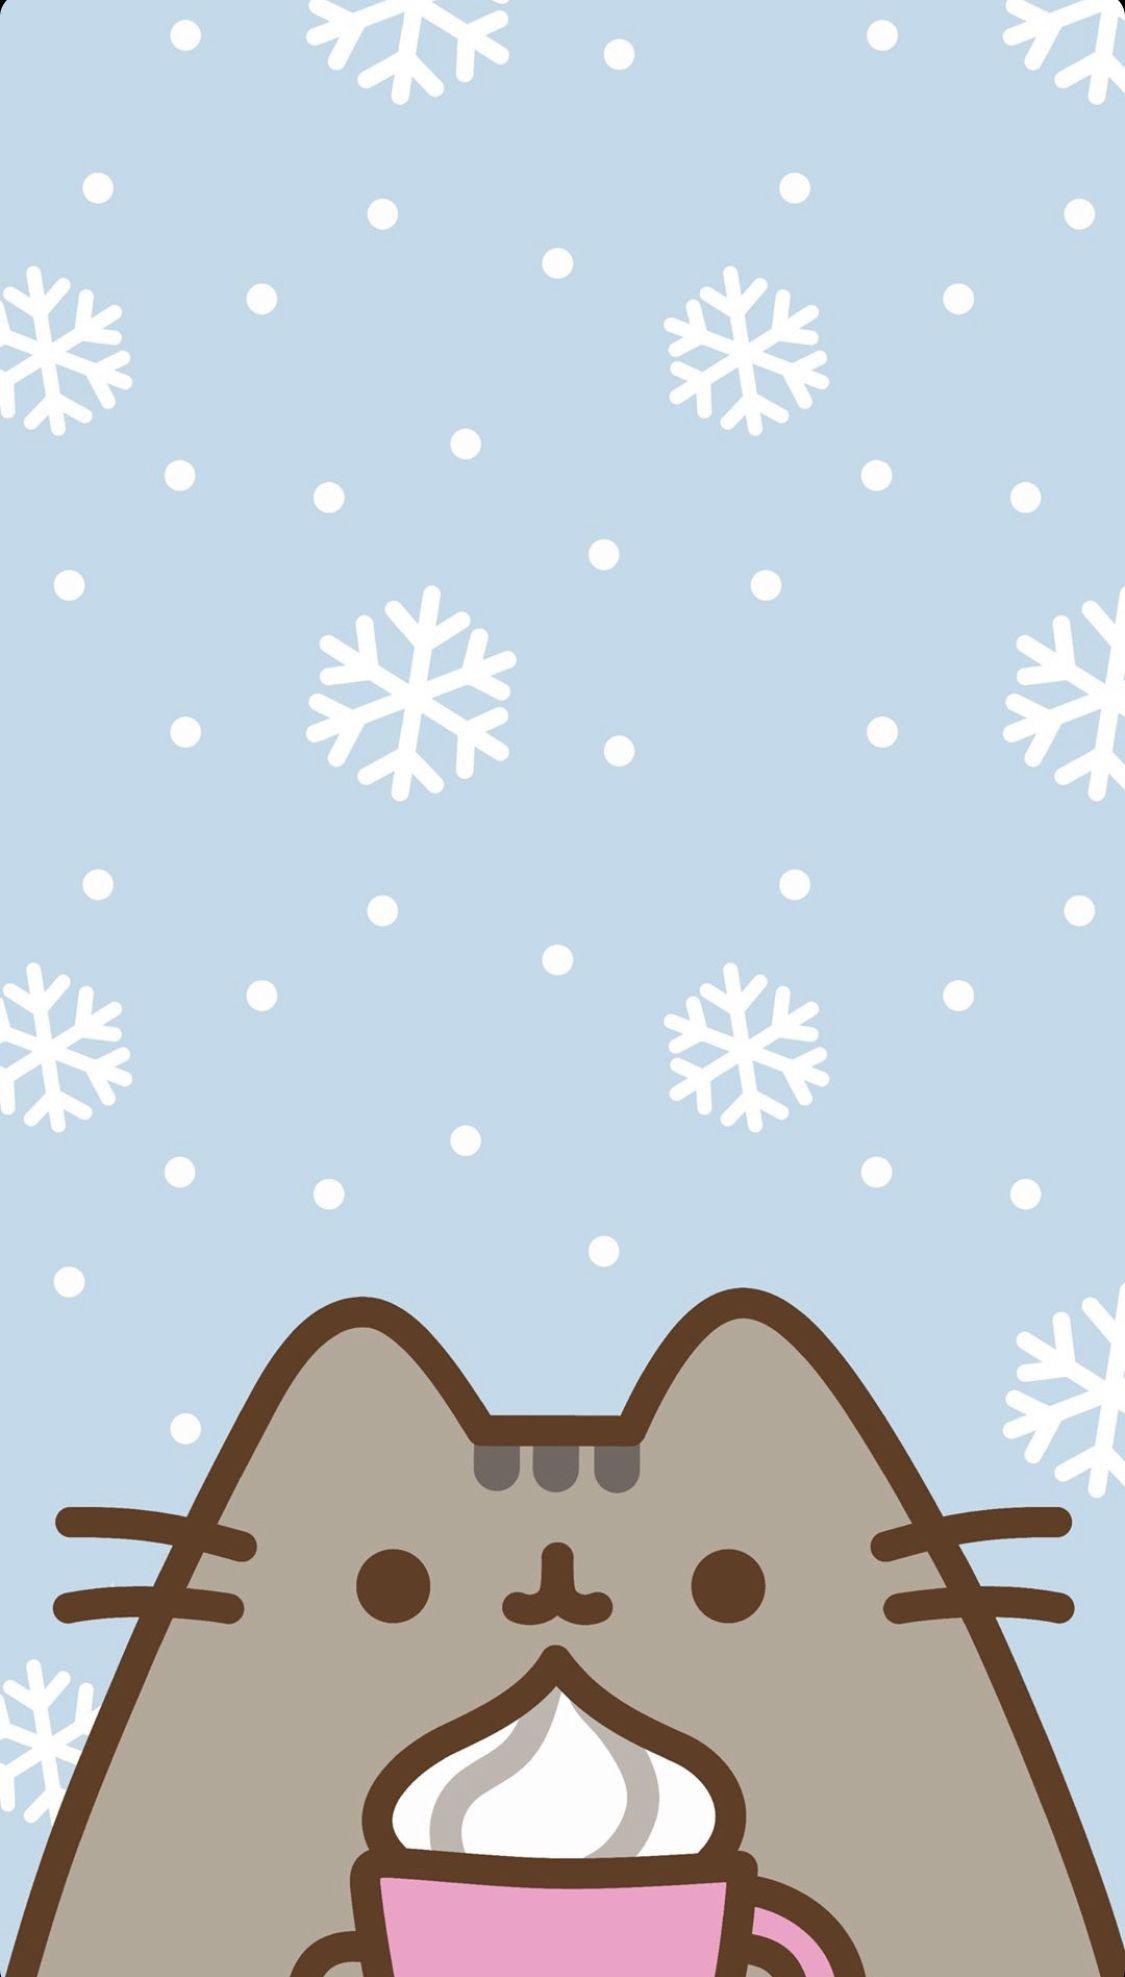 Claires  Check out our free Pusheen christmas phone wallpapers in our  latest blog post now httpwwwclairesstylebookcomfreeexclusive pusheenandroidandiphonechristmaswallpapers PusheenAtClaires   Facebook